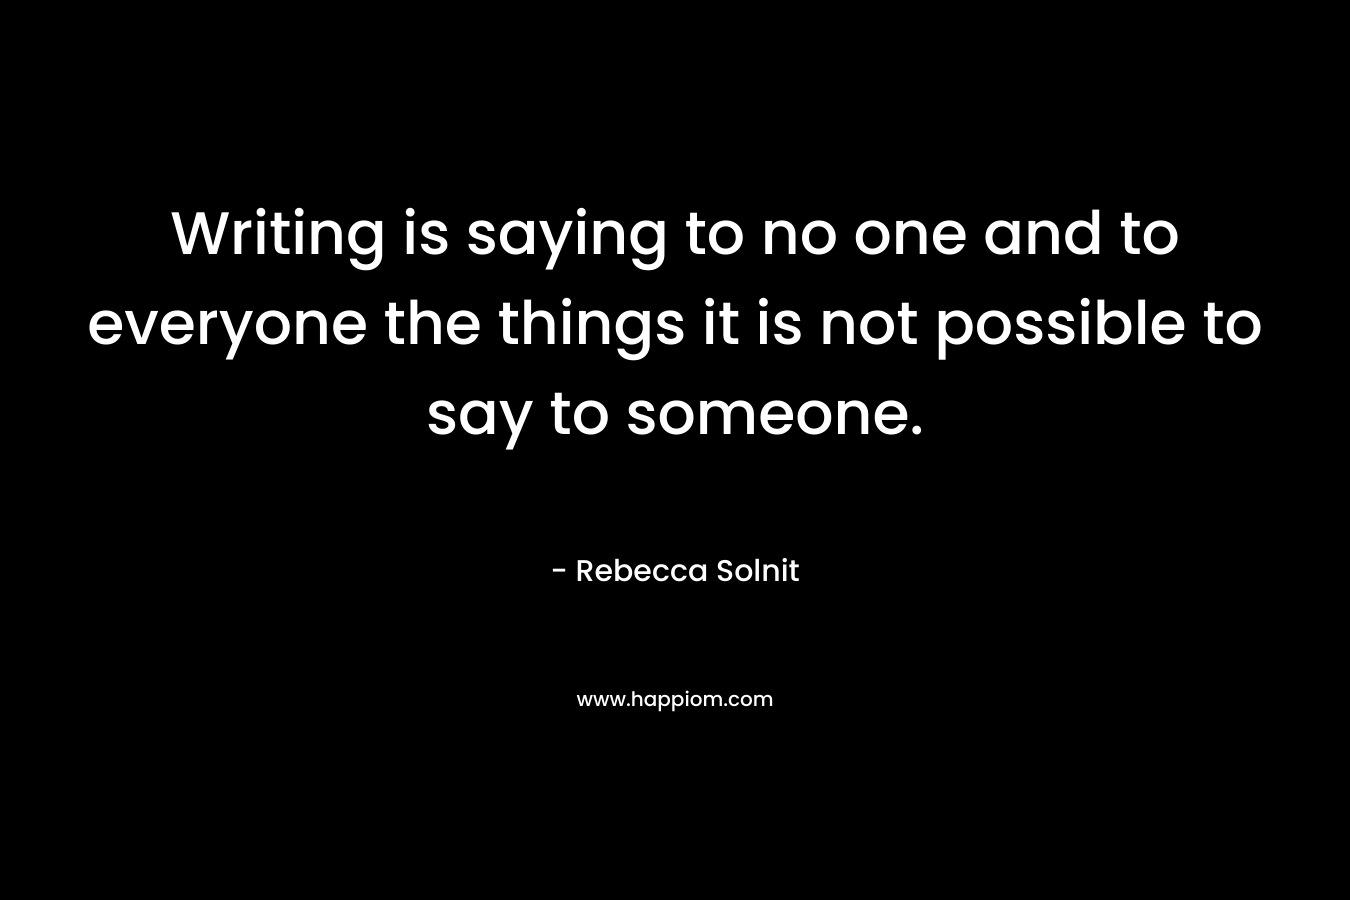 Writing is saying to no one and to everyone the things it is not possible to say to someone. – Rebecca Solnit